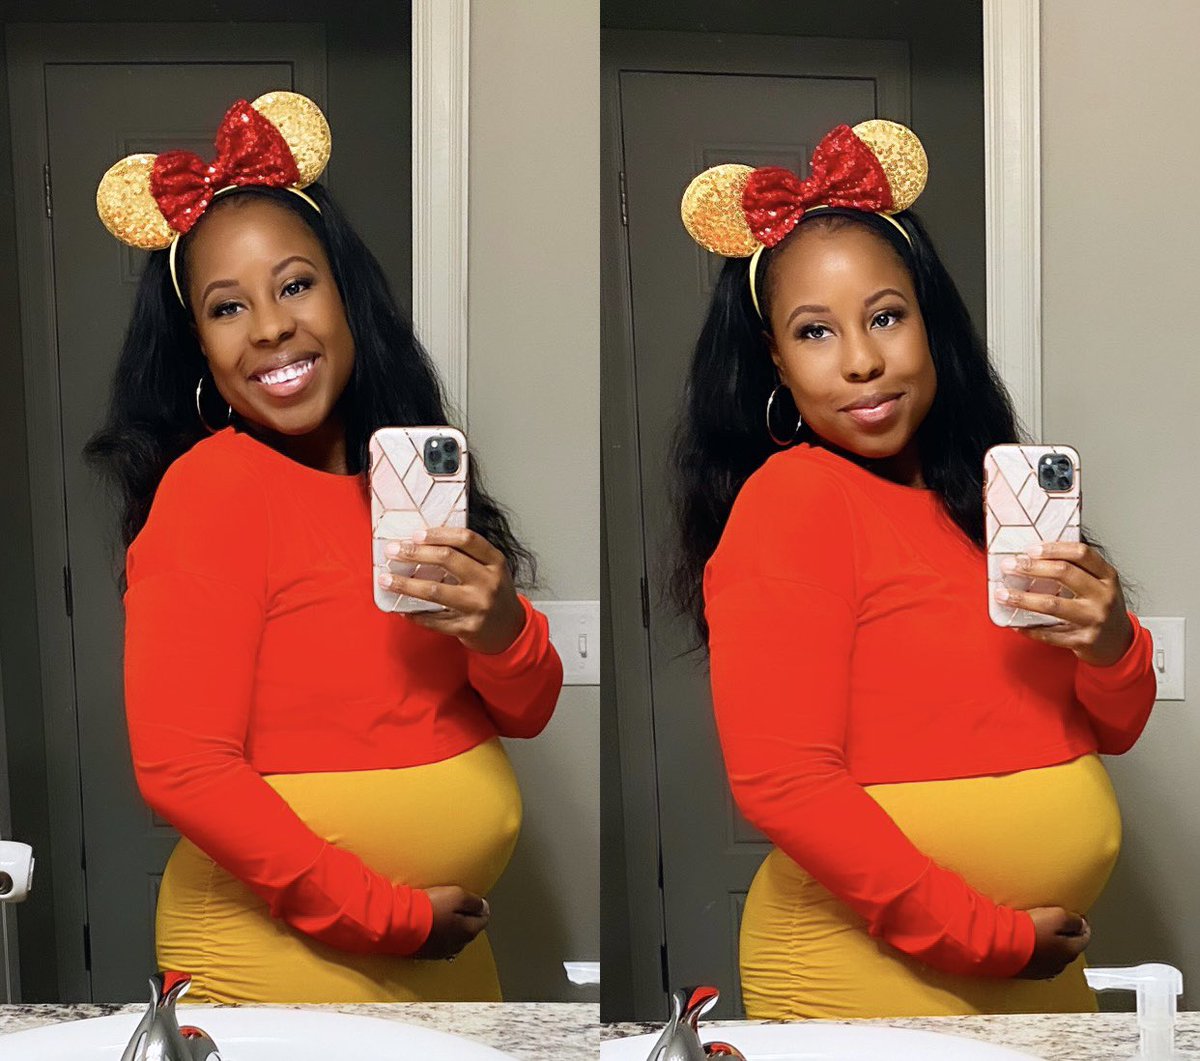 My favorite character when I was a kid…Winnie the Pooh! 🥰 

#halloweencostume #pregnantwithtwins #pregnantcostume #halloween2021 #18weekspregnant